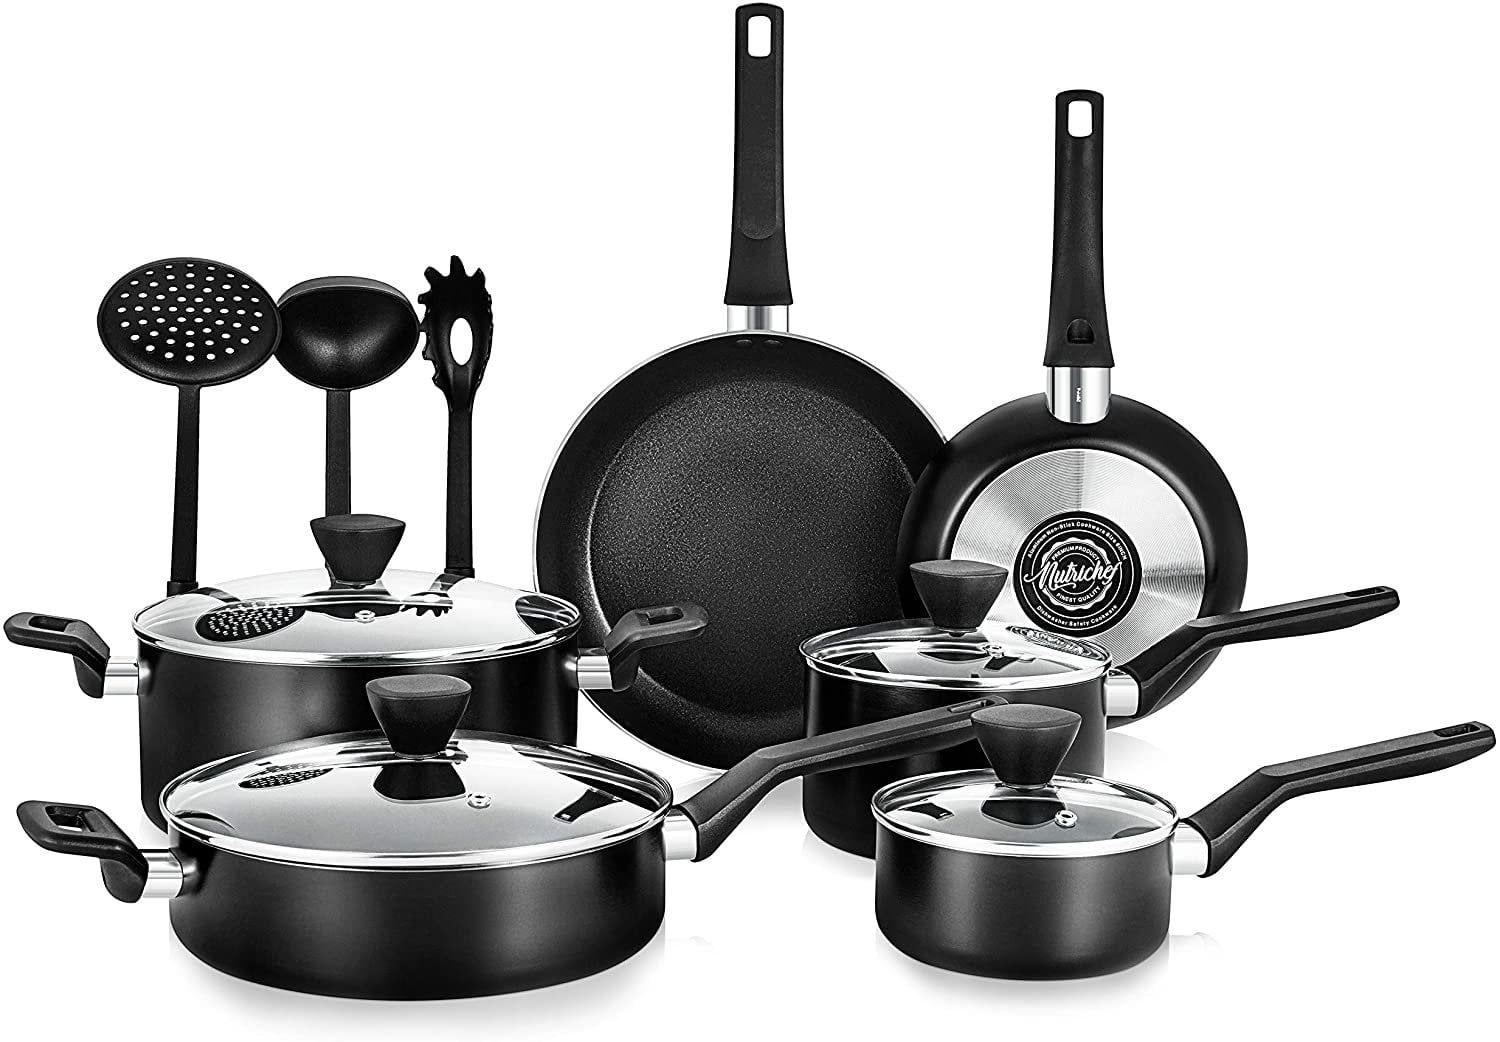 Which Utensils Should You Use with Nonstick Cookware? – American